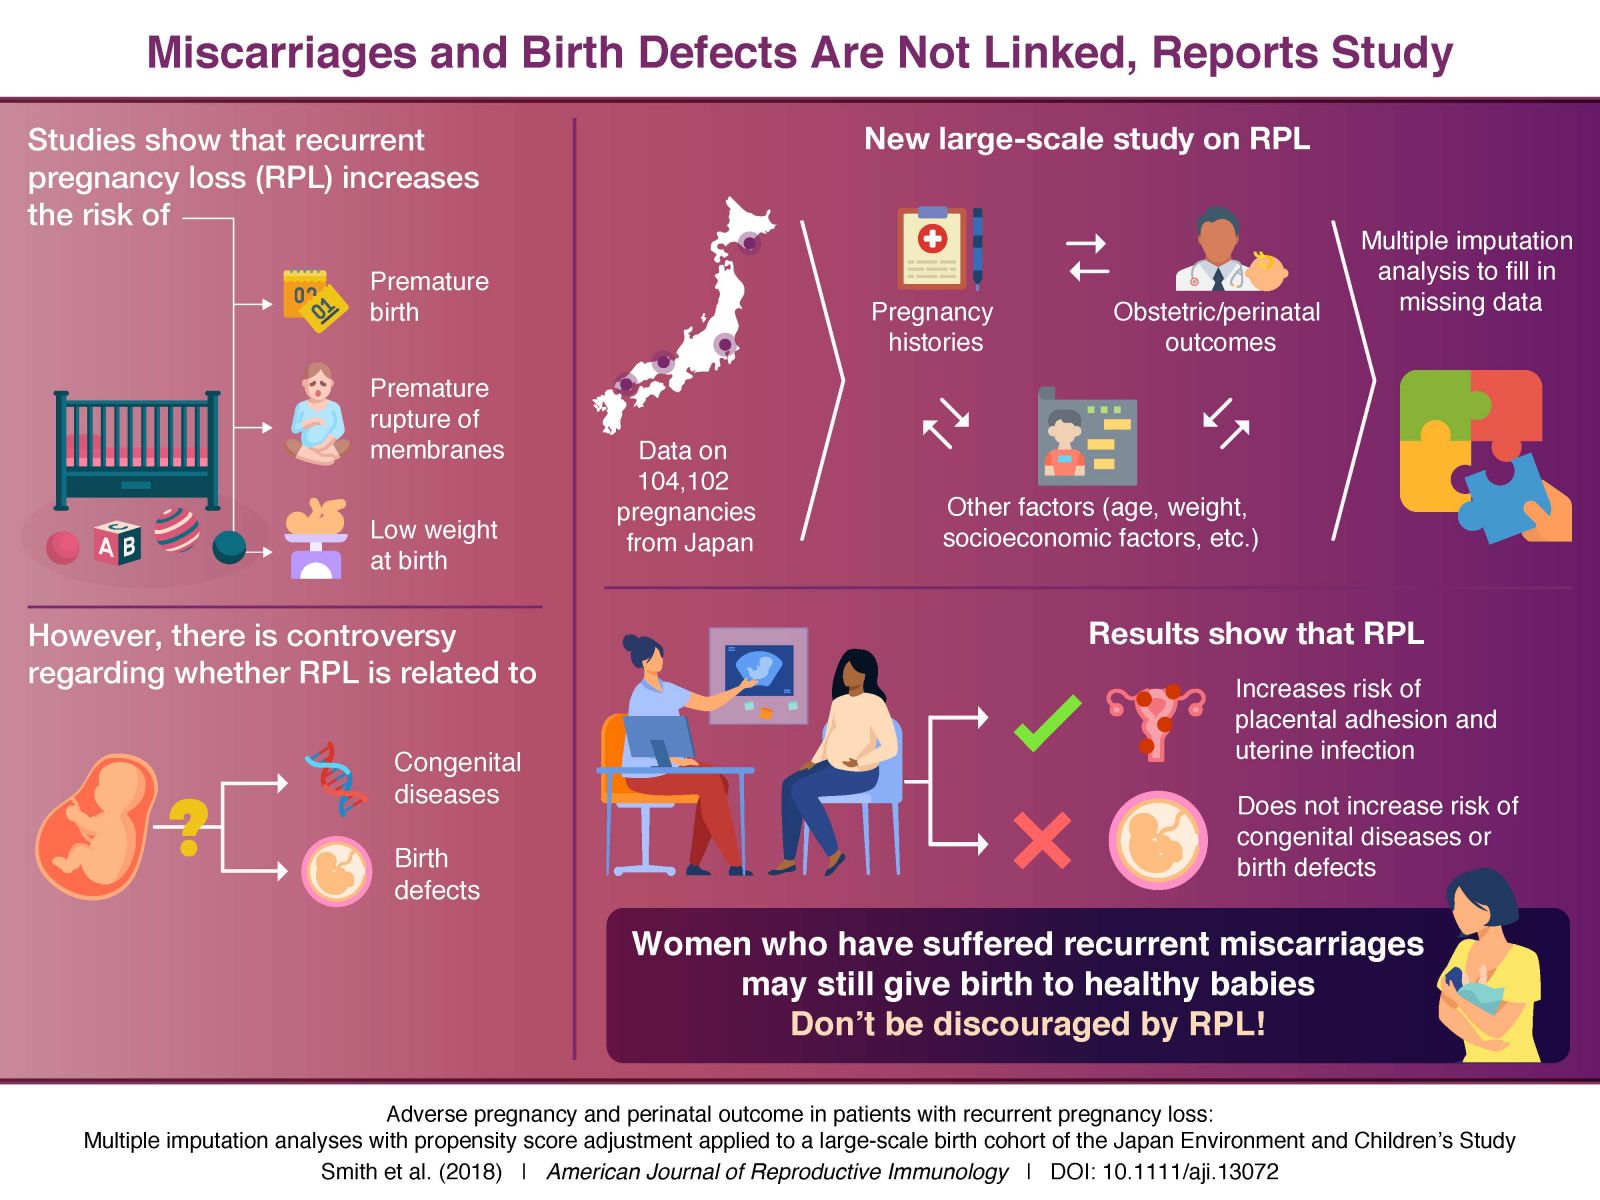 Don’t be Discouraged by Recurrent Pregnancy Loss: No Link Found Between Recurrent Miscarriages and Congenital Anomaly and Aneuploidy